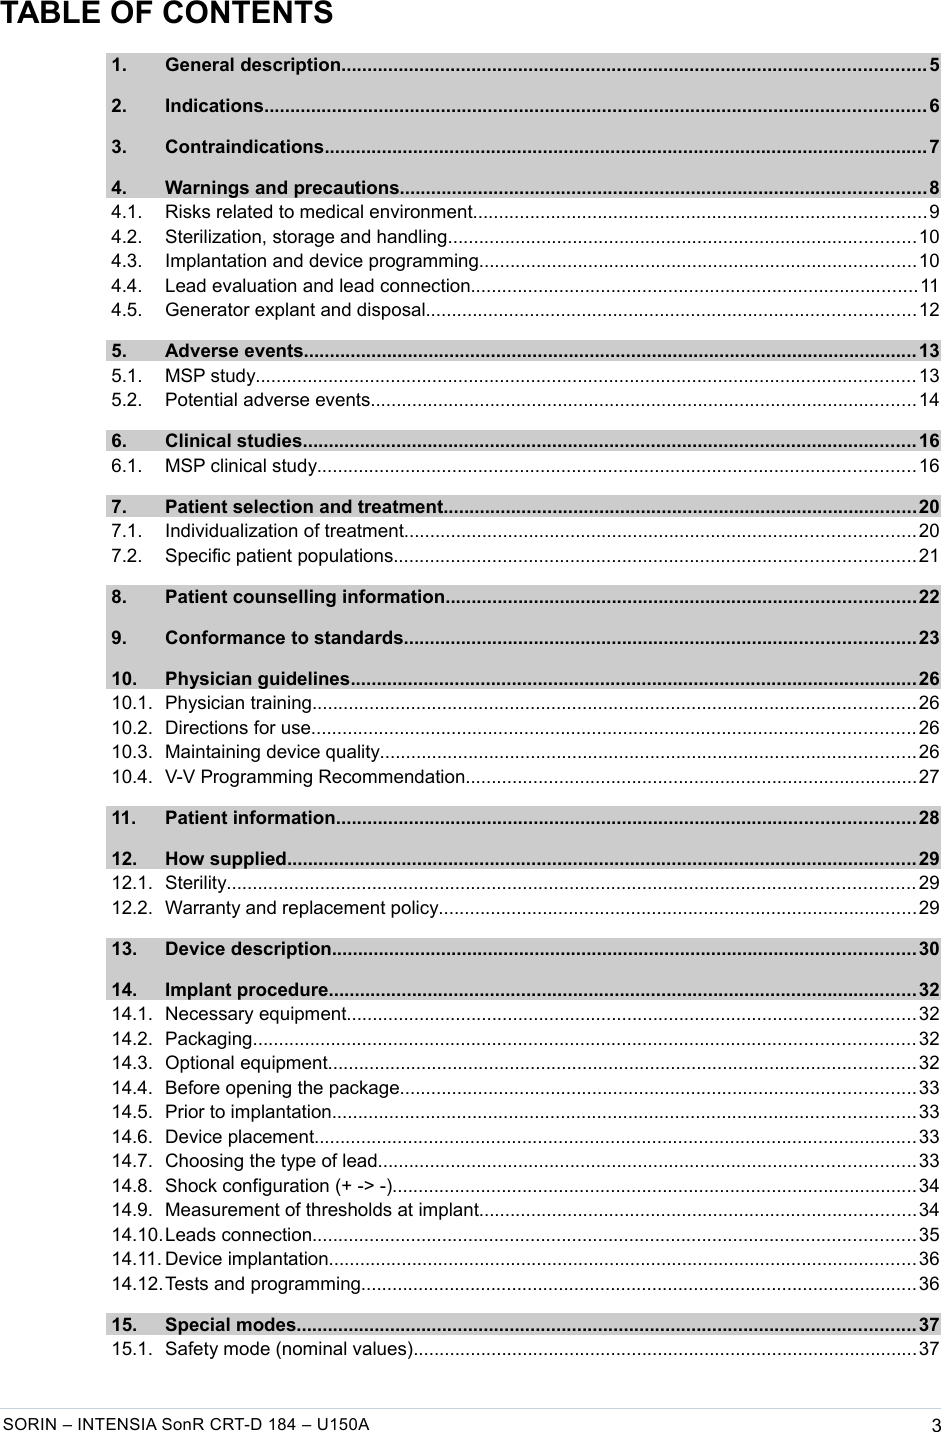   TABLE OF CONTENTS 1. General description................................................................................................................ 5  2. Indications............................................................................................................................... 6  3. Contraindications....................................................................................................................7  4. Warnings and precautions.....................................................................................................8  4.1. Risks related to medical environment.......................................................................................9  4.2. Sterilization, storage and handling..........................................................................................10  4.3. Implantation and device programming....................................................................................10  4.4. Lead evaluation and lead connection......................................................................................11  4.5. Generator explant and disposal..............................................................................................12  5. Adverse events...................................................................................................................... 13  5.1. MSP study............................................................................................................................... 13  5.2. Potential adverse events.........................................................................................................14  6. Clinical studies...................................................................................................................... 16  6.1. MSP clinical study................................................................................................................... 16  7. Patient selection and treatment...........................................................................................20  7.1. Individualization of treatment..................................................................................................20  7.2. Specific patient populations....................................................................................................21  8. Patient counselling information..........................................................................................22  9. Conformance to standards..................................................................................................23  10. Physician guidelines.............................................................................................................26  10.1. Physician training.................................................................................................................... 26  10.2. Directions for use.................................................................................................................... 26  10.3. Maintaining device quality.......................................................................................................26  10.4. V-V Programming Recommendation.......................................................................................27  11. Patient information............................................................................................................... 28  12. How supplied......................................................................................................................... 29  12.1. Sterility.................................................................................................................................... 29  12.2. Warranty and replacement policy............................................................................................29  13. Device description................................................................................................................ 30  14. Implant procedure................................................................................................................. 32  14.1. Necessary equipment.............................................................................................................32  14.2. Packaging............................................................................................................................... 32  14.3. Optional equipment.................................................................................................................32  14.4. Before opening the package...................................................................................................33  14.5. Prior to implantation................................................................................................................33  14.6. Device placement.................................................................................................................... 33  14.7. Choosing the type of lead.......................................................................................................33  14.8. Shock configuration (+ -&gt; -).....................................................................................................34  14.9. Measurement of thresholds at implant....................................................................................34  14.10.Leads connection.................................................................................................................... 35  14.11. Device implantation................................................................................................................. 36  14.12.Tests and programming........................................................................................................... 36  15. Special modes....................................................................................................................... 37  15.1. Safety mode (nominal values).................................................................................................37 SORIN – INTENSIA SonR CRT-D 184 – U150A 3